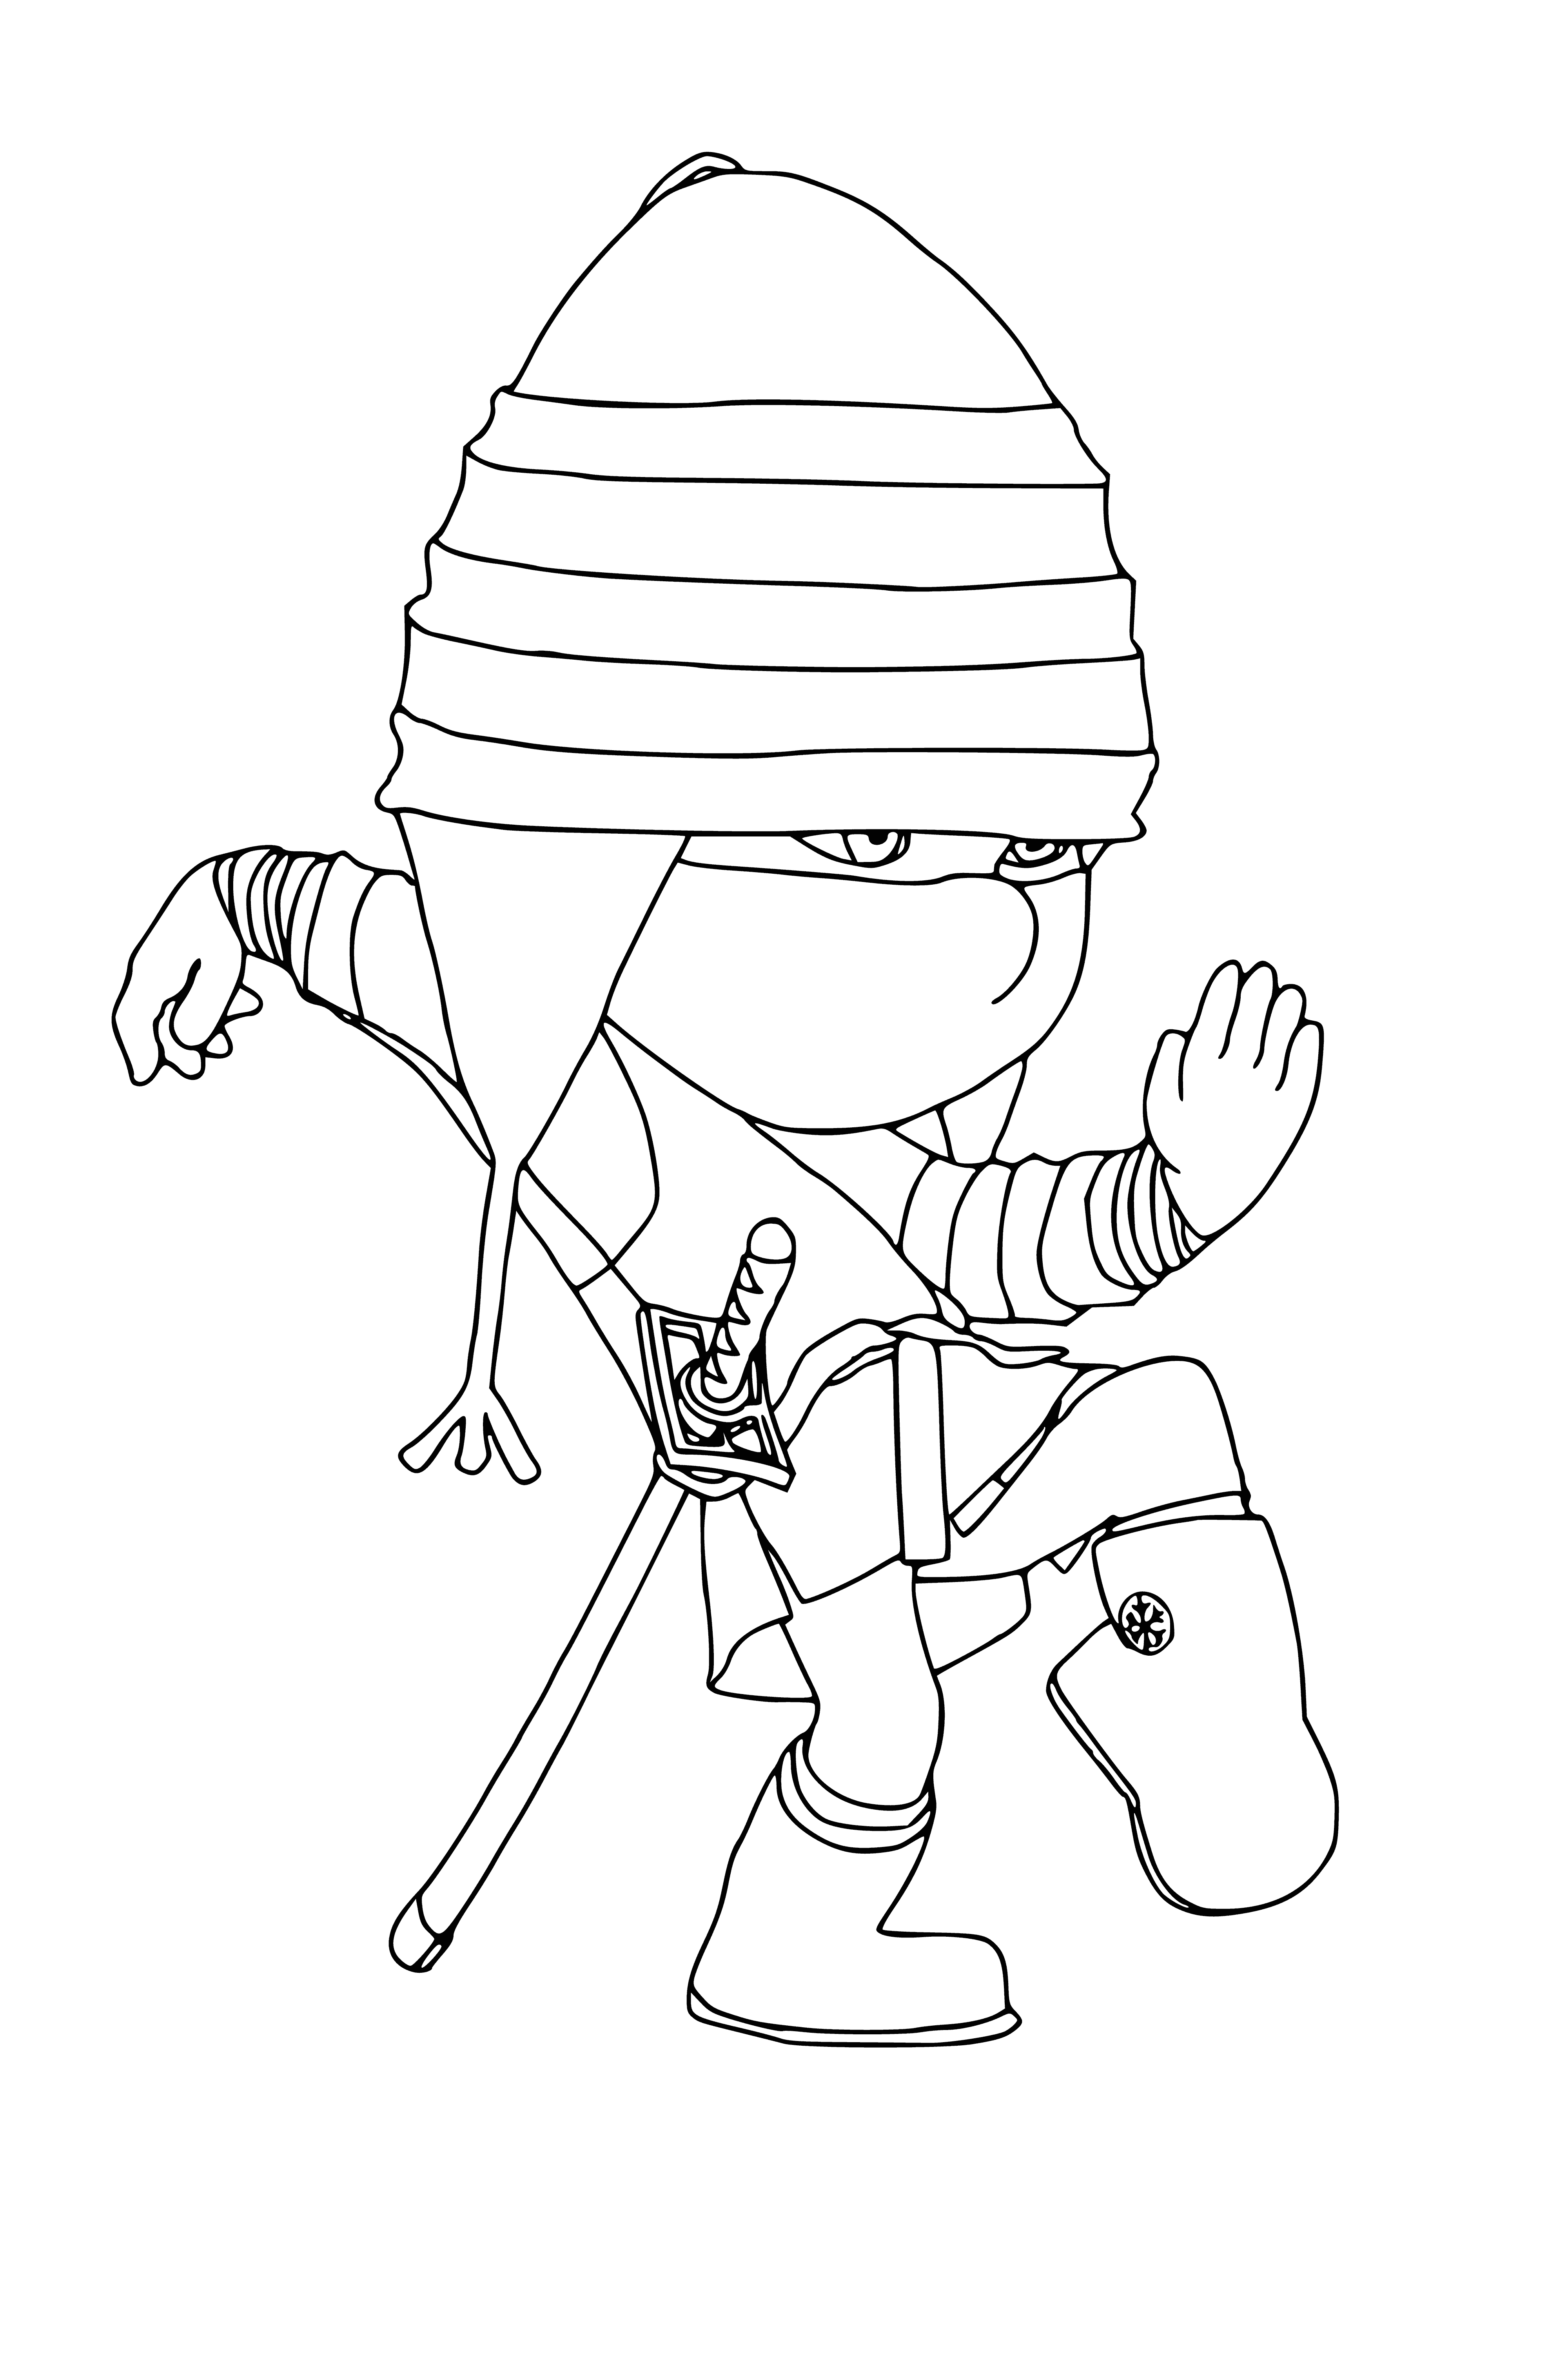 coloring page: Edith from Despicable Me is holding a blue balloon, wearing white hat and blue dress.